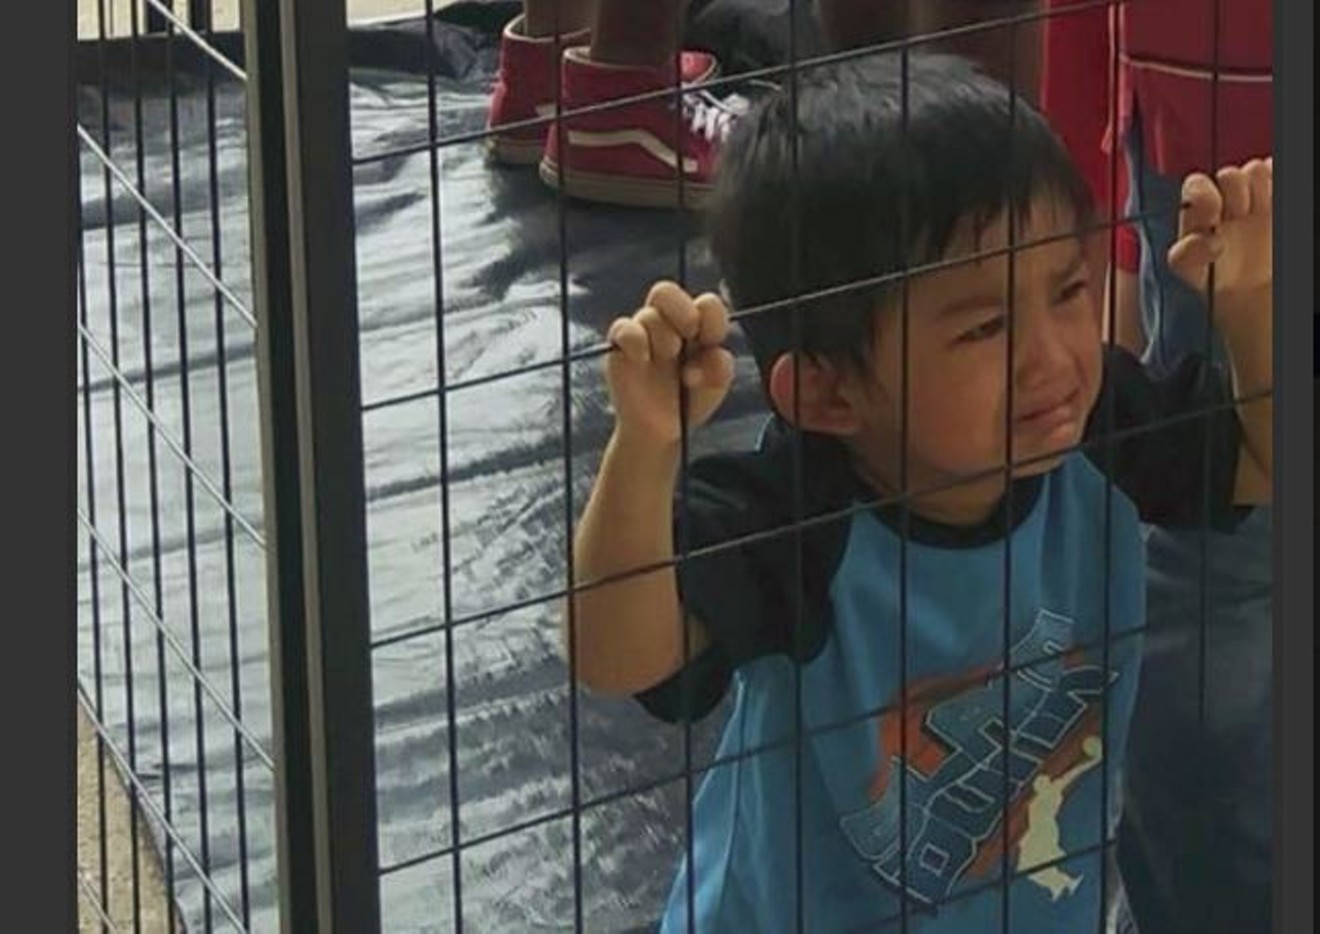 The Trump administration is detaining undocumented children after separating them from a parent — does it matter that this viral photo doesn't really show a migrant kid or a real jail?